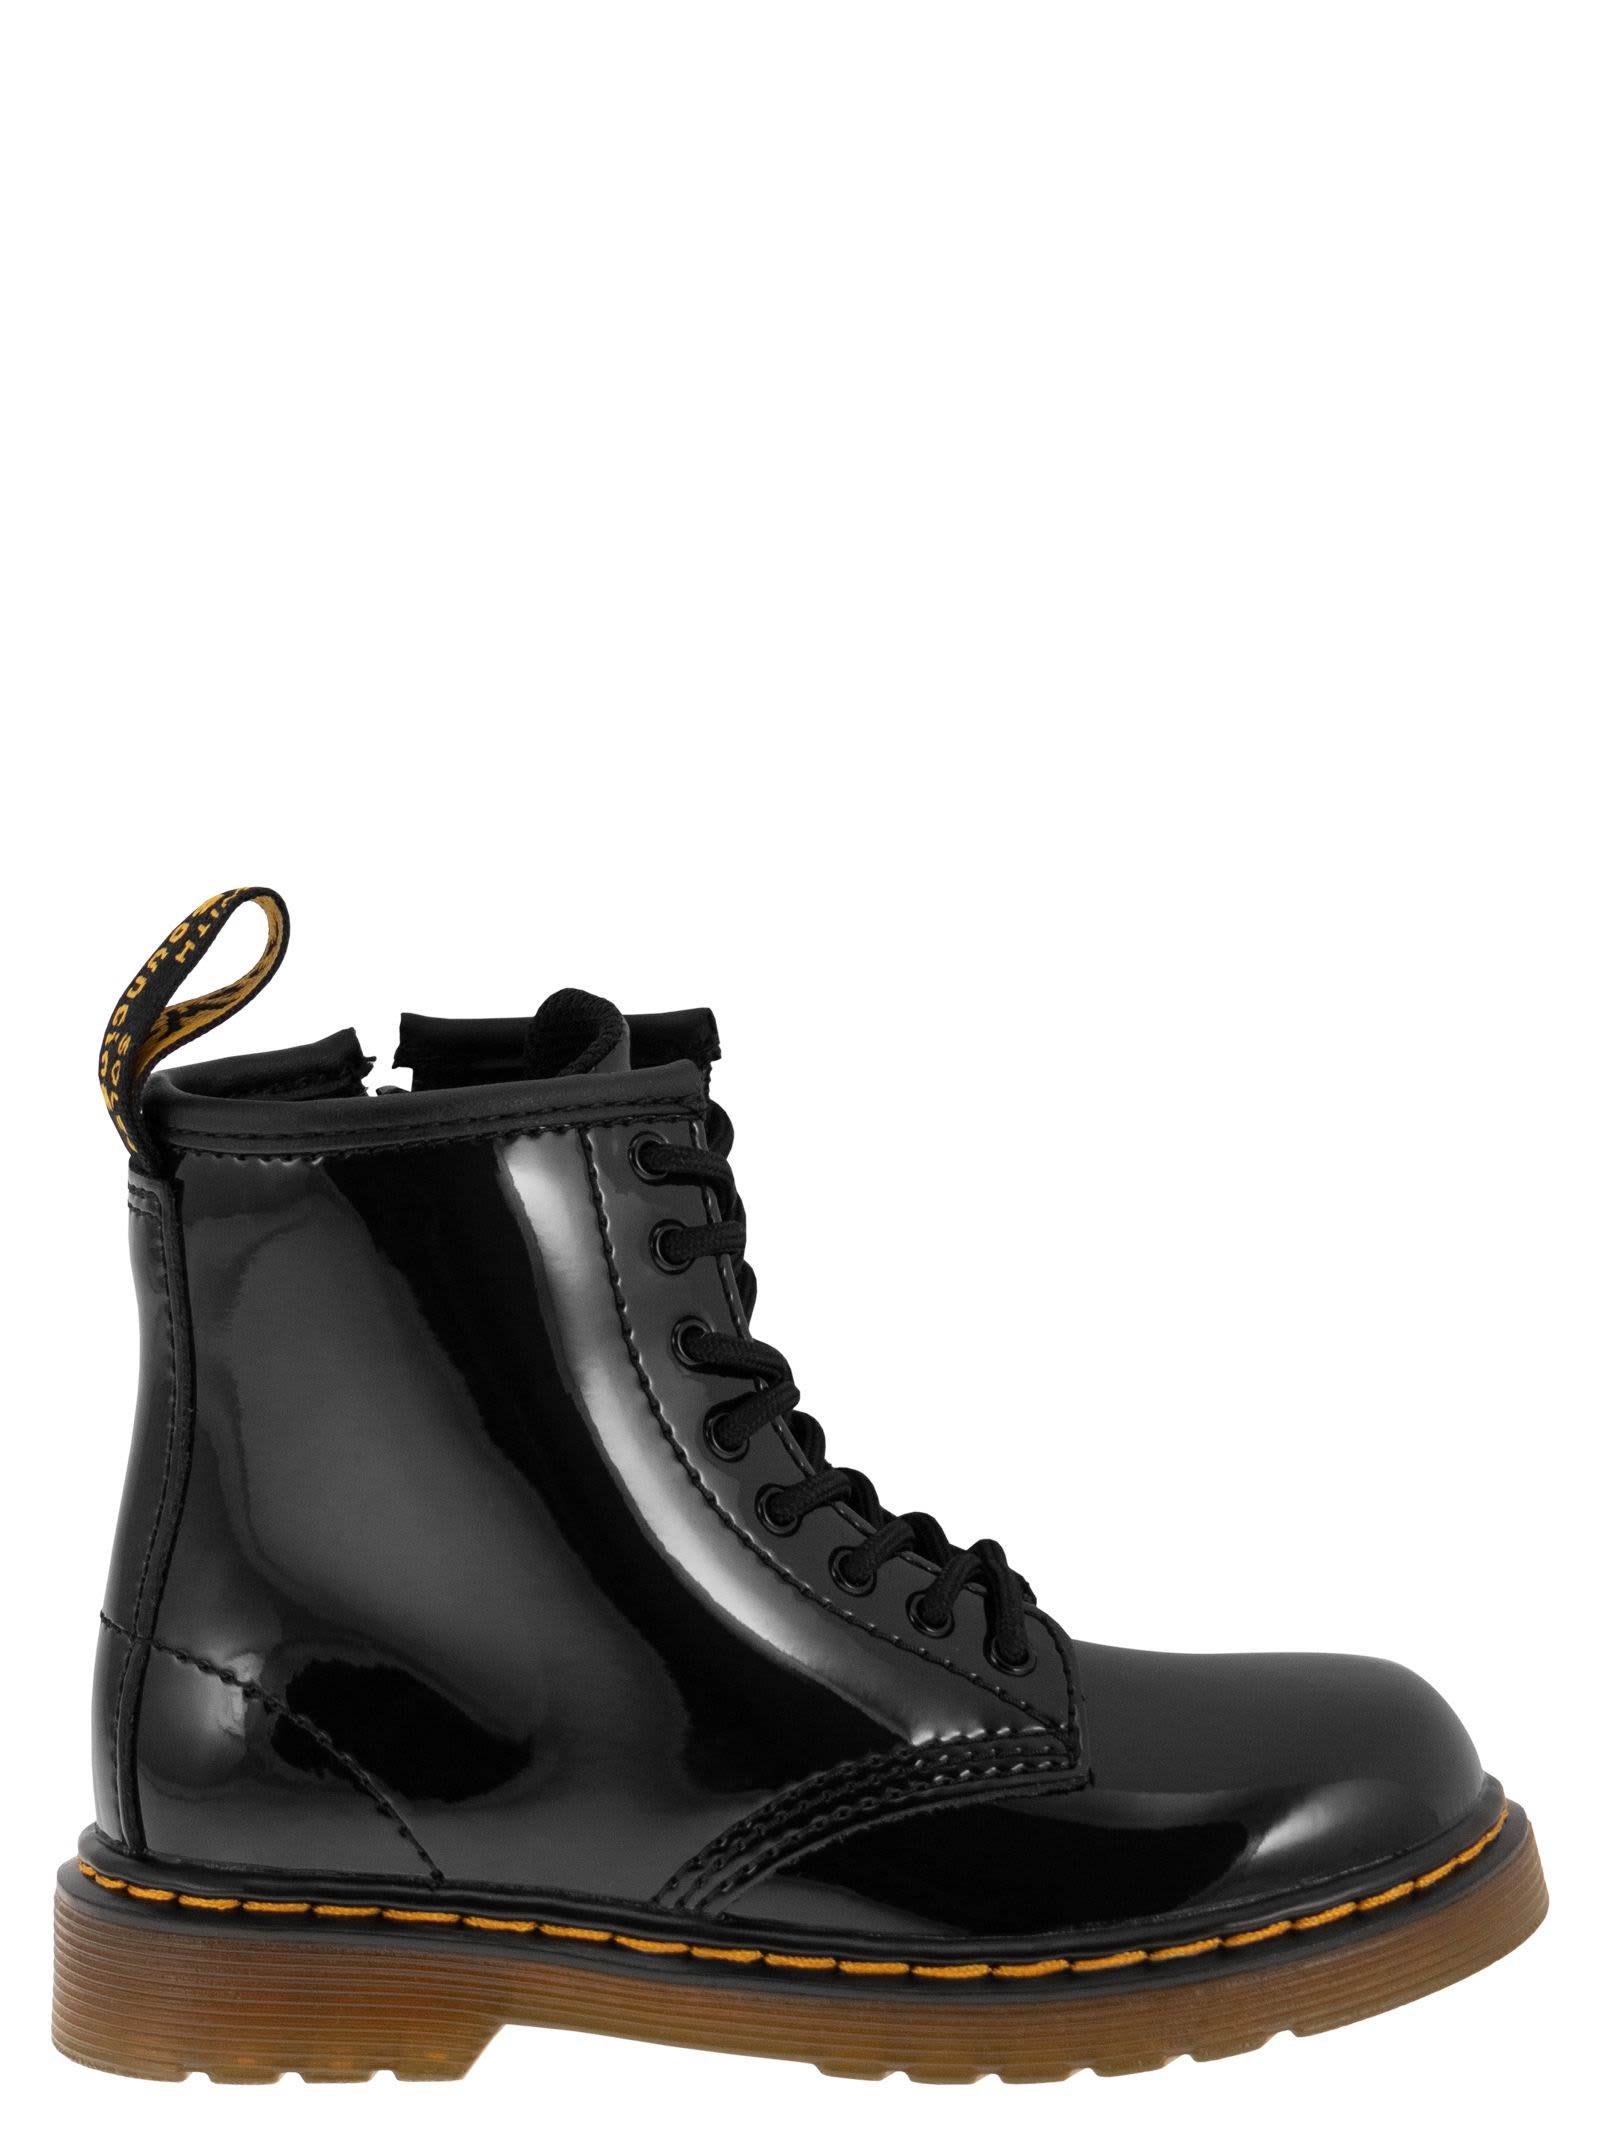 Dr. Martens 1460 - Patent Leather Lace-up Boots